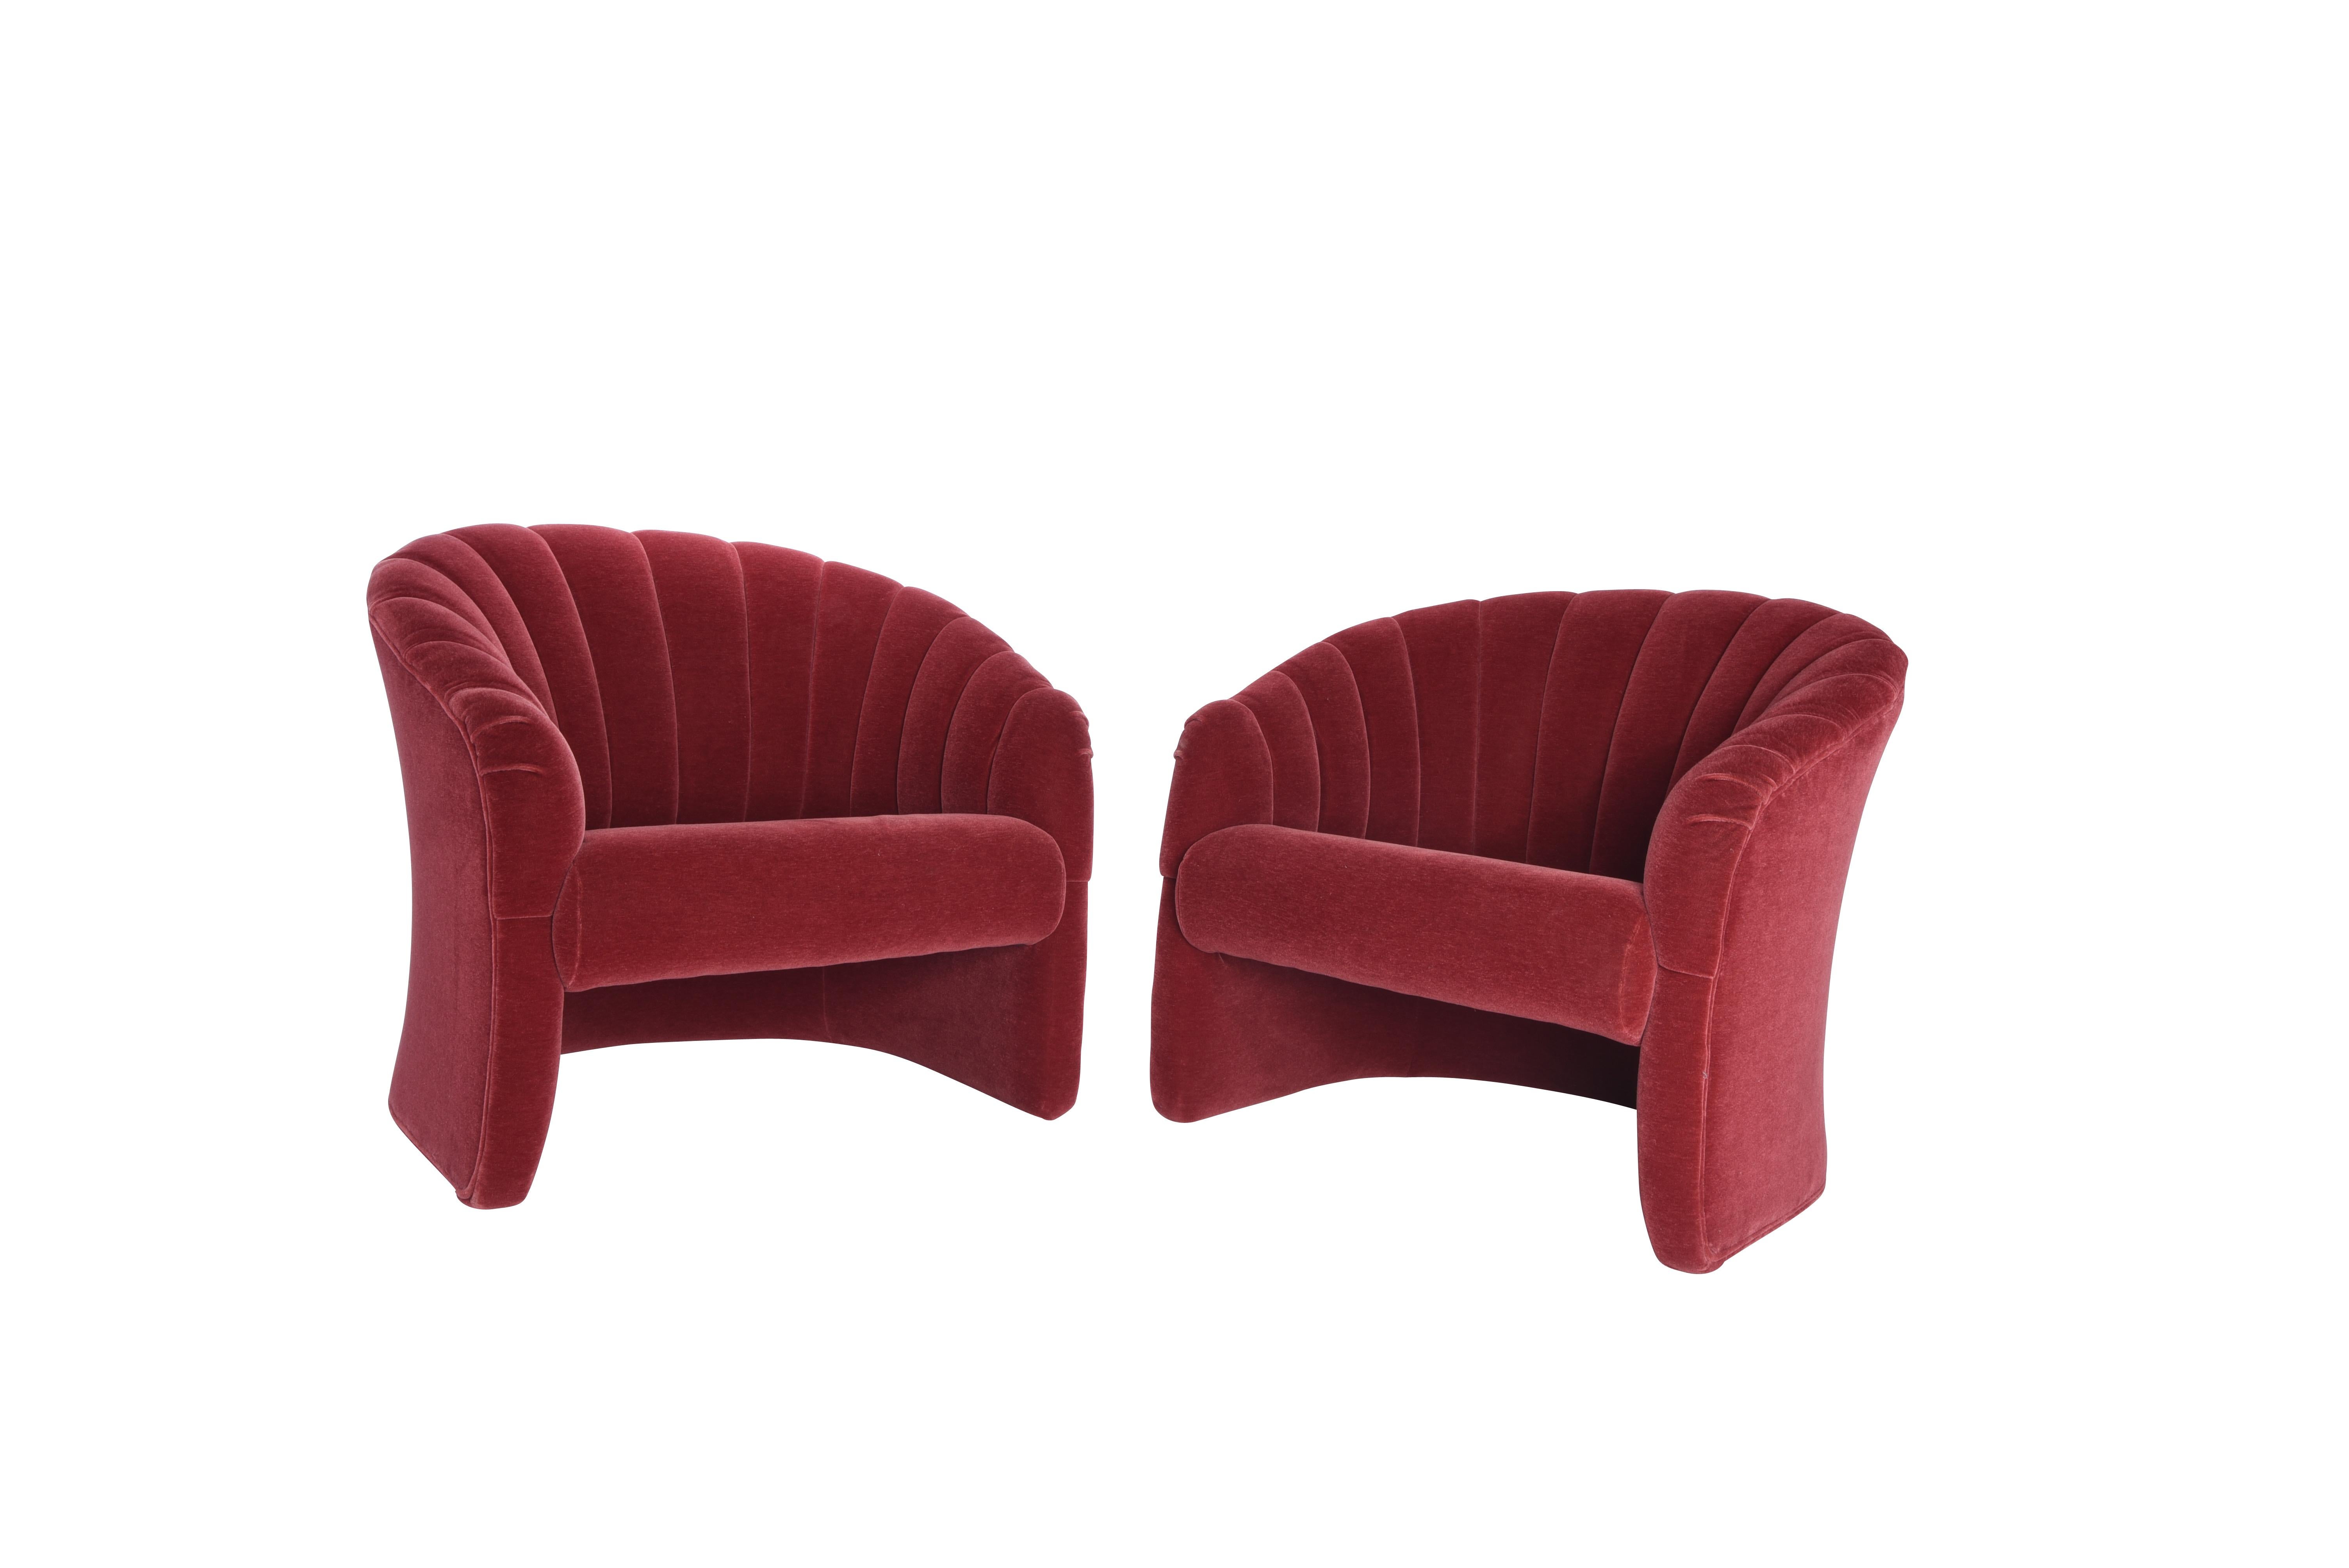 Barrel back lounge chairs, circa 1970. Original red mohair is in excellent condition.